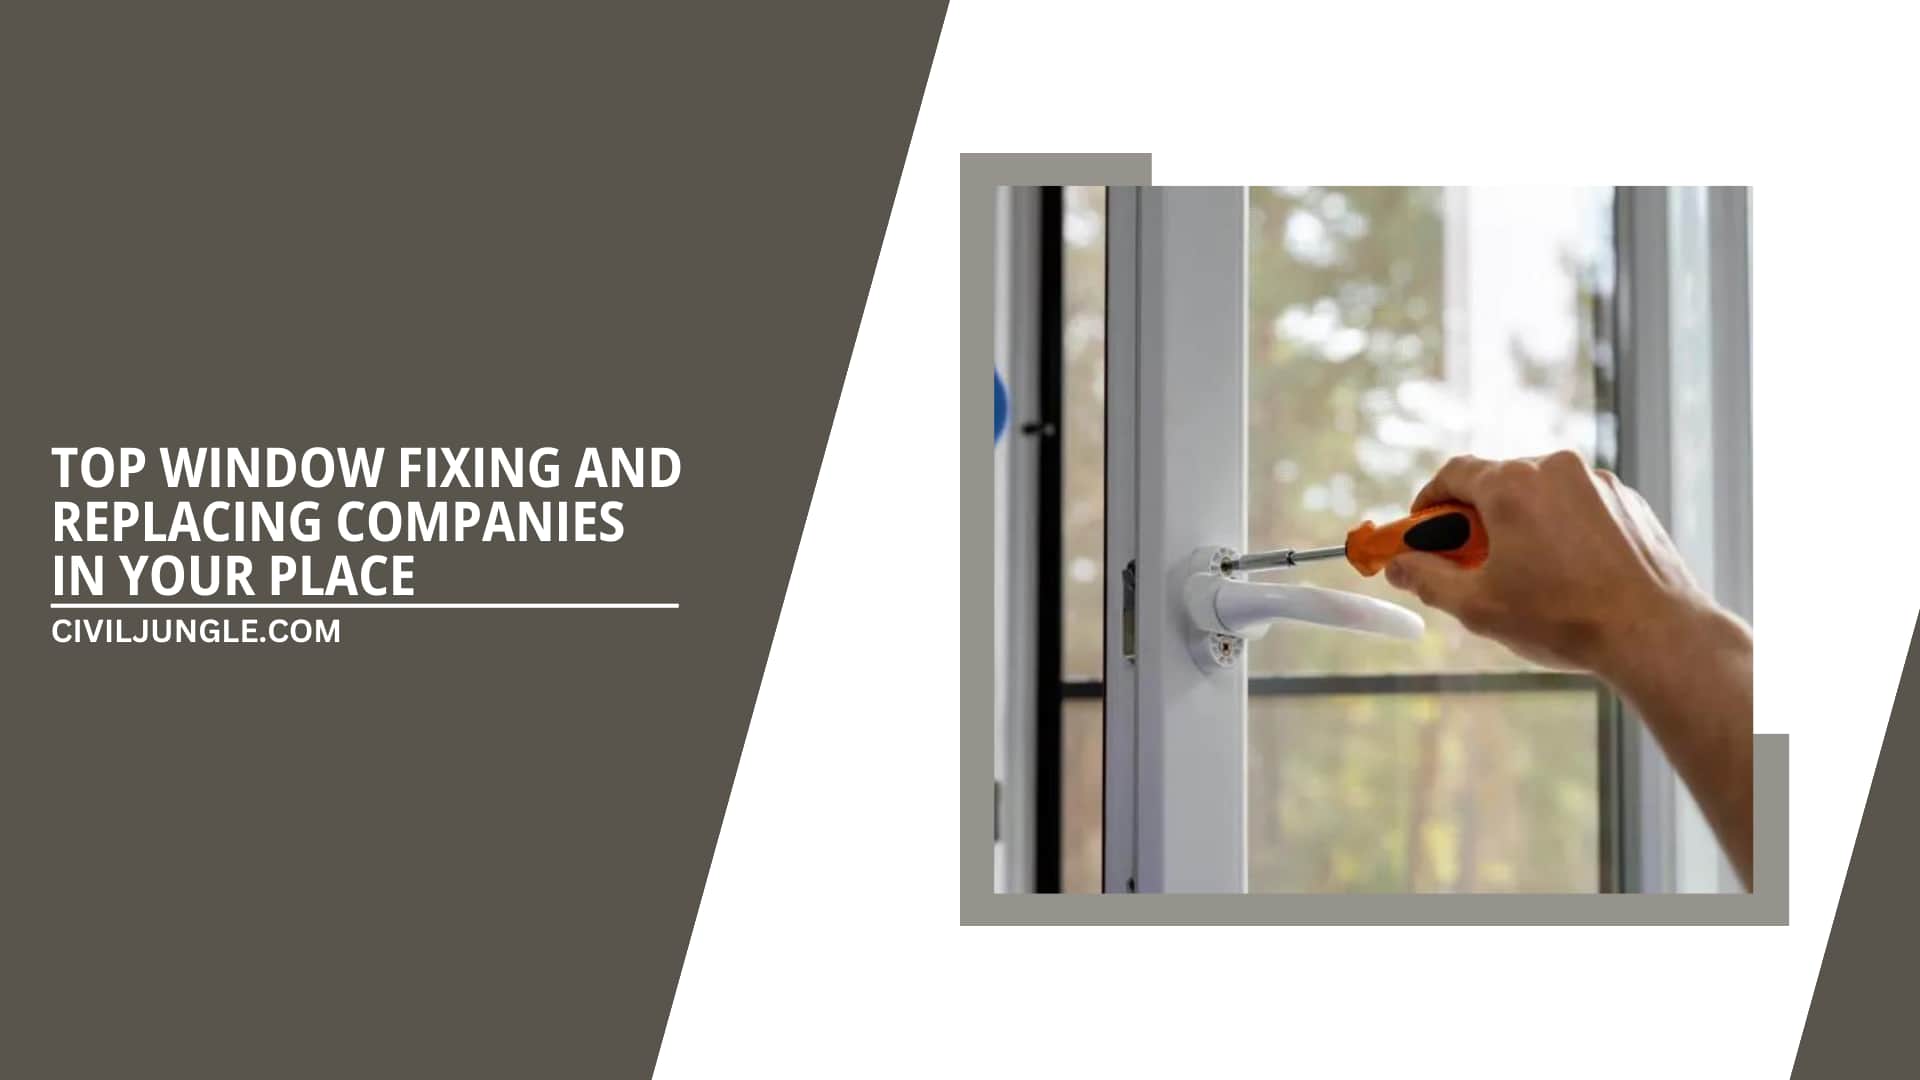 Top Window Fixing and Replacing Companies in Your Place